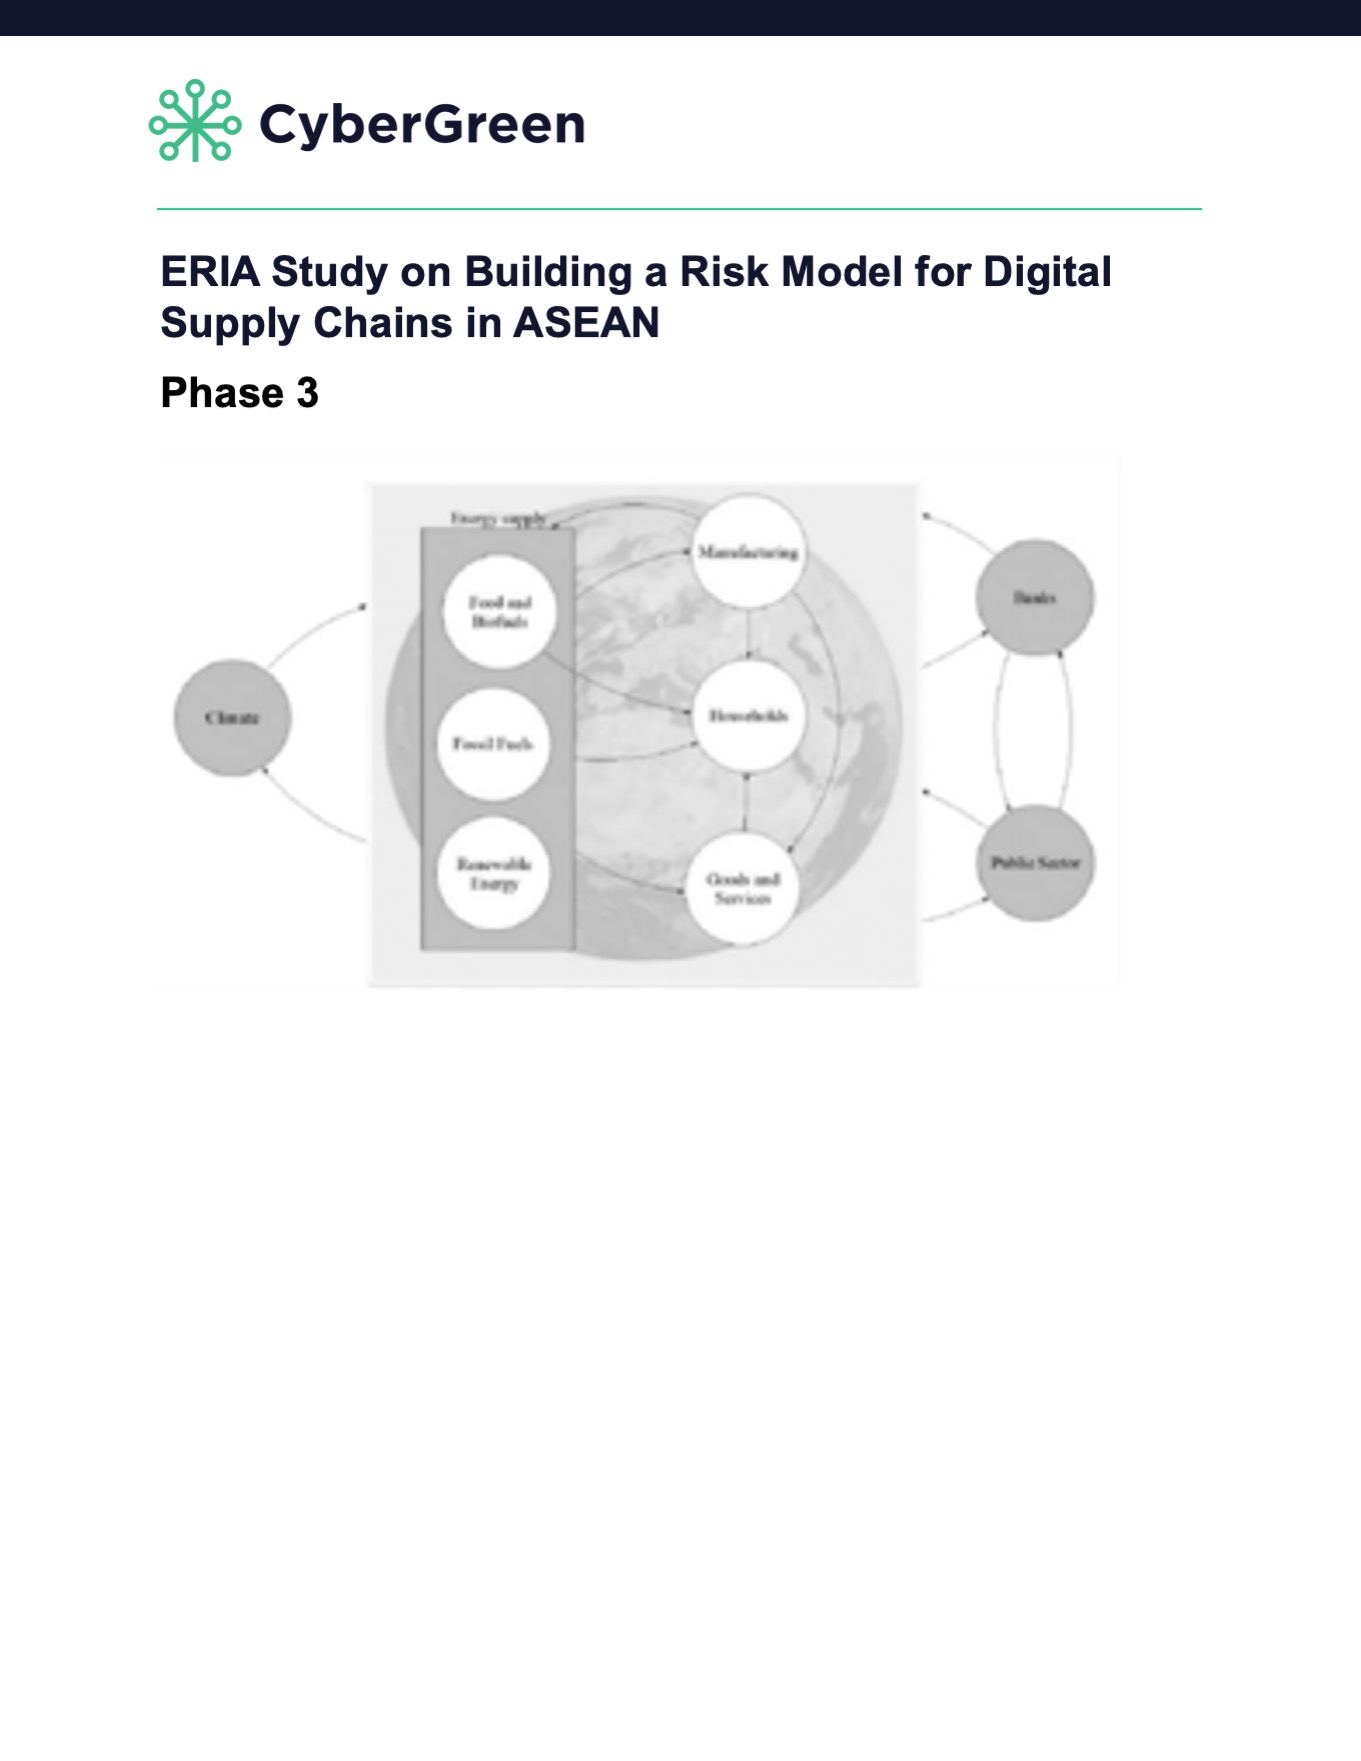 ERIA Study - Risk Model for Digital Supply Chains in ASEAN - phase 3